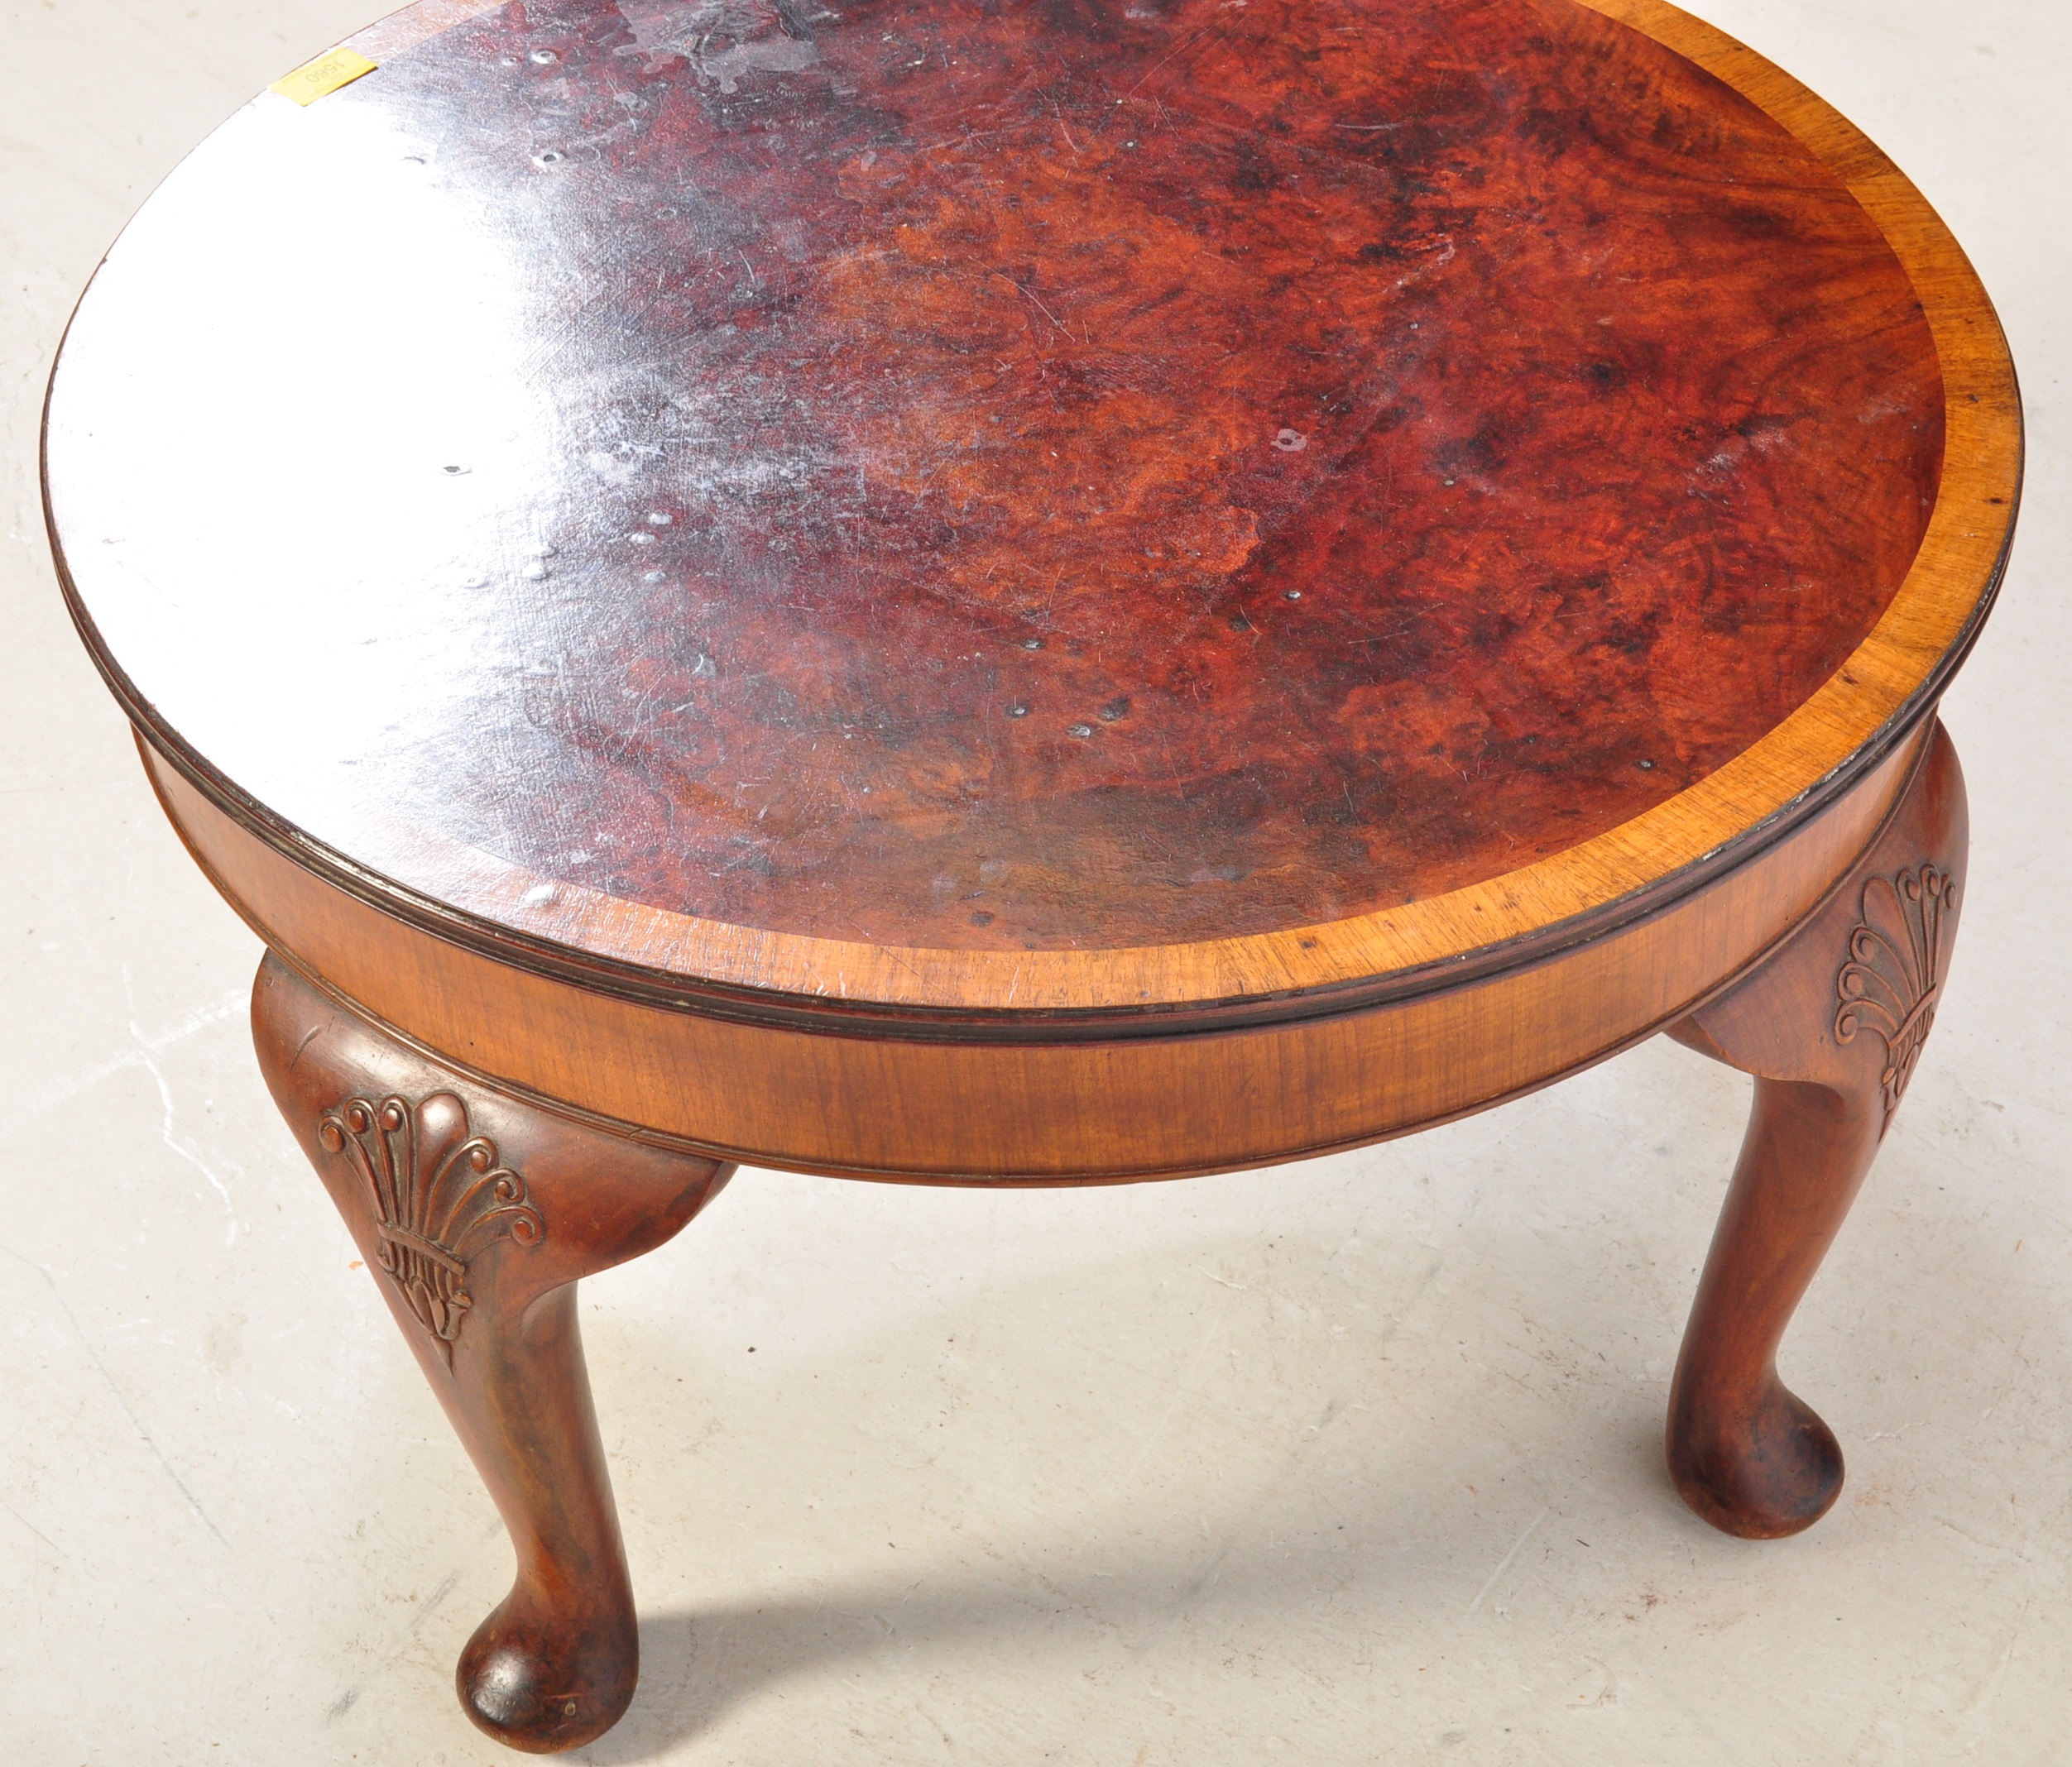 20TH CENTURY QUEEN ANNE REVIVAL WALNUT COFFEE TABLE - Image 6 of 6